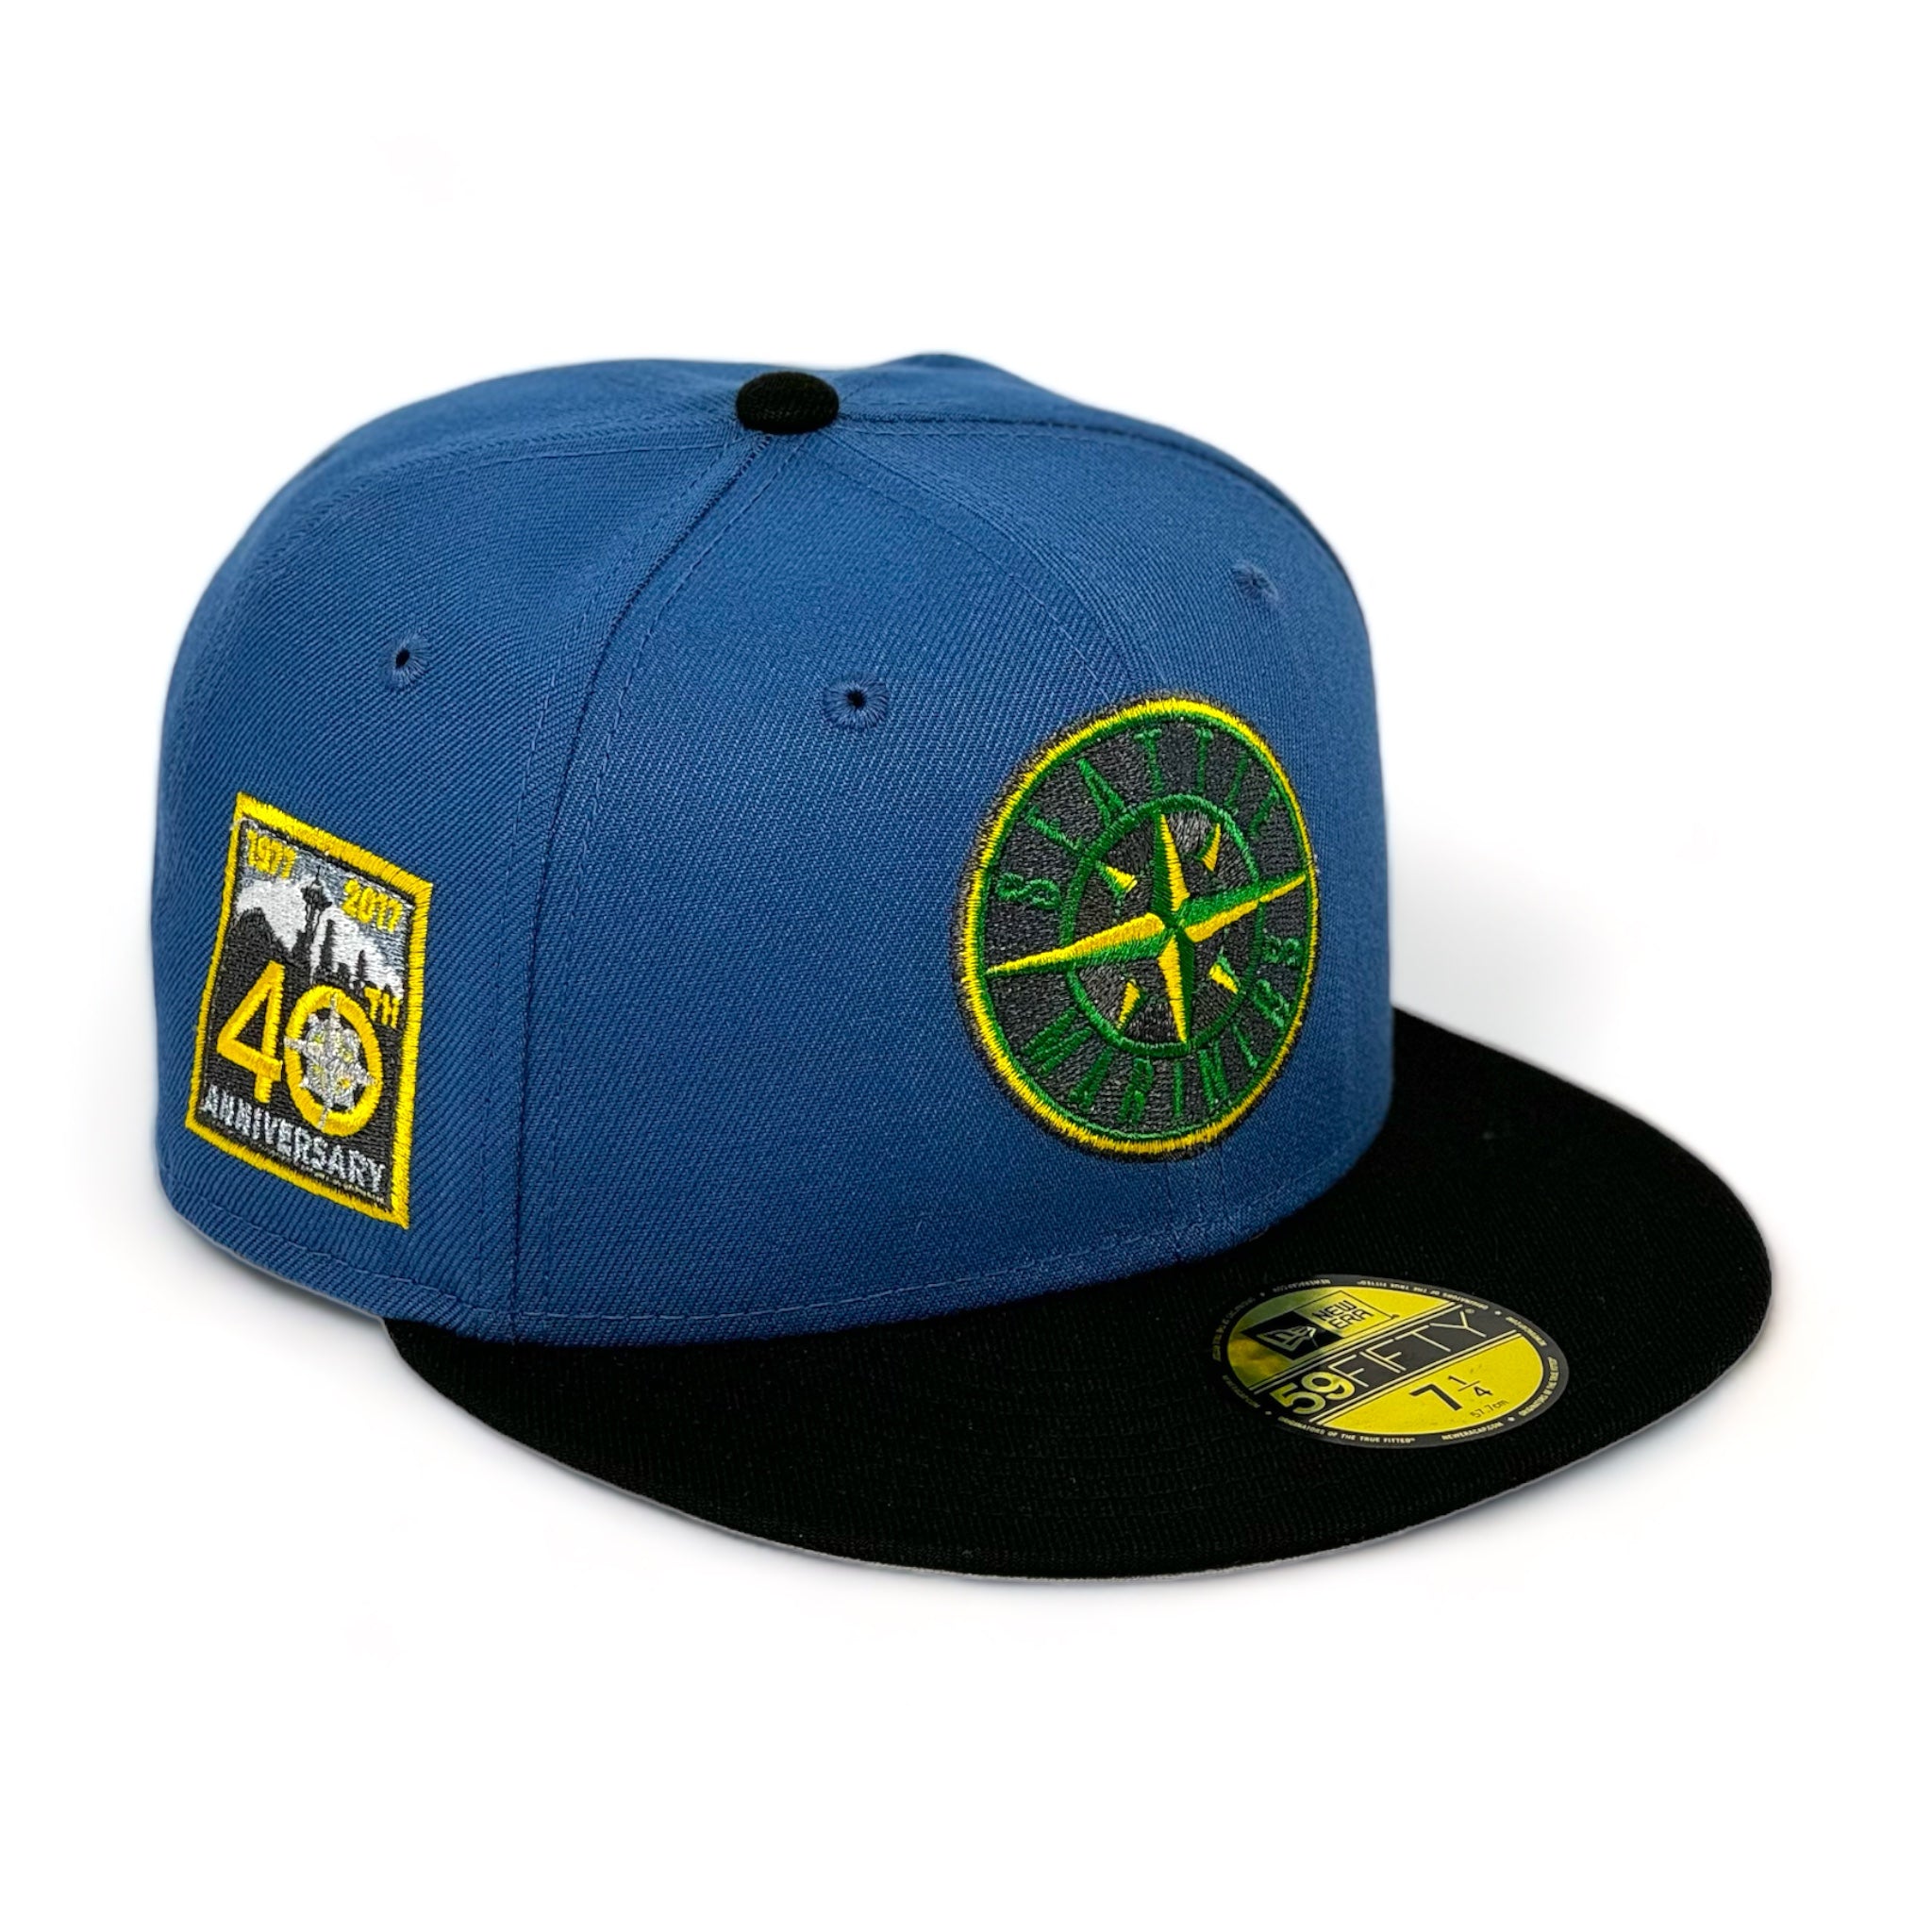 SEATTLE MARINERS (INDIGO) (40TH ANN) NEW ERA 59FIFTY FITTED